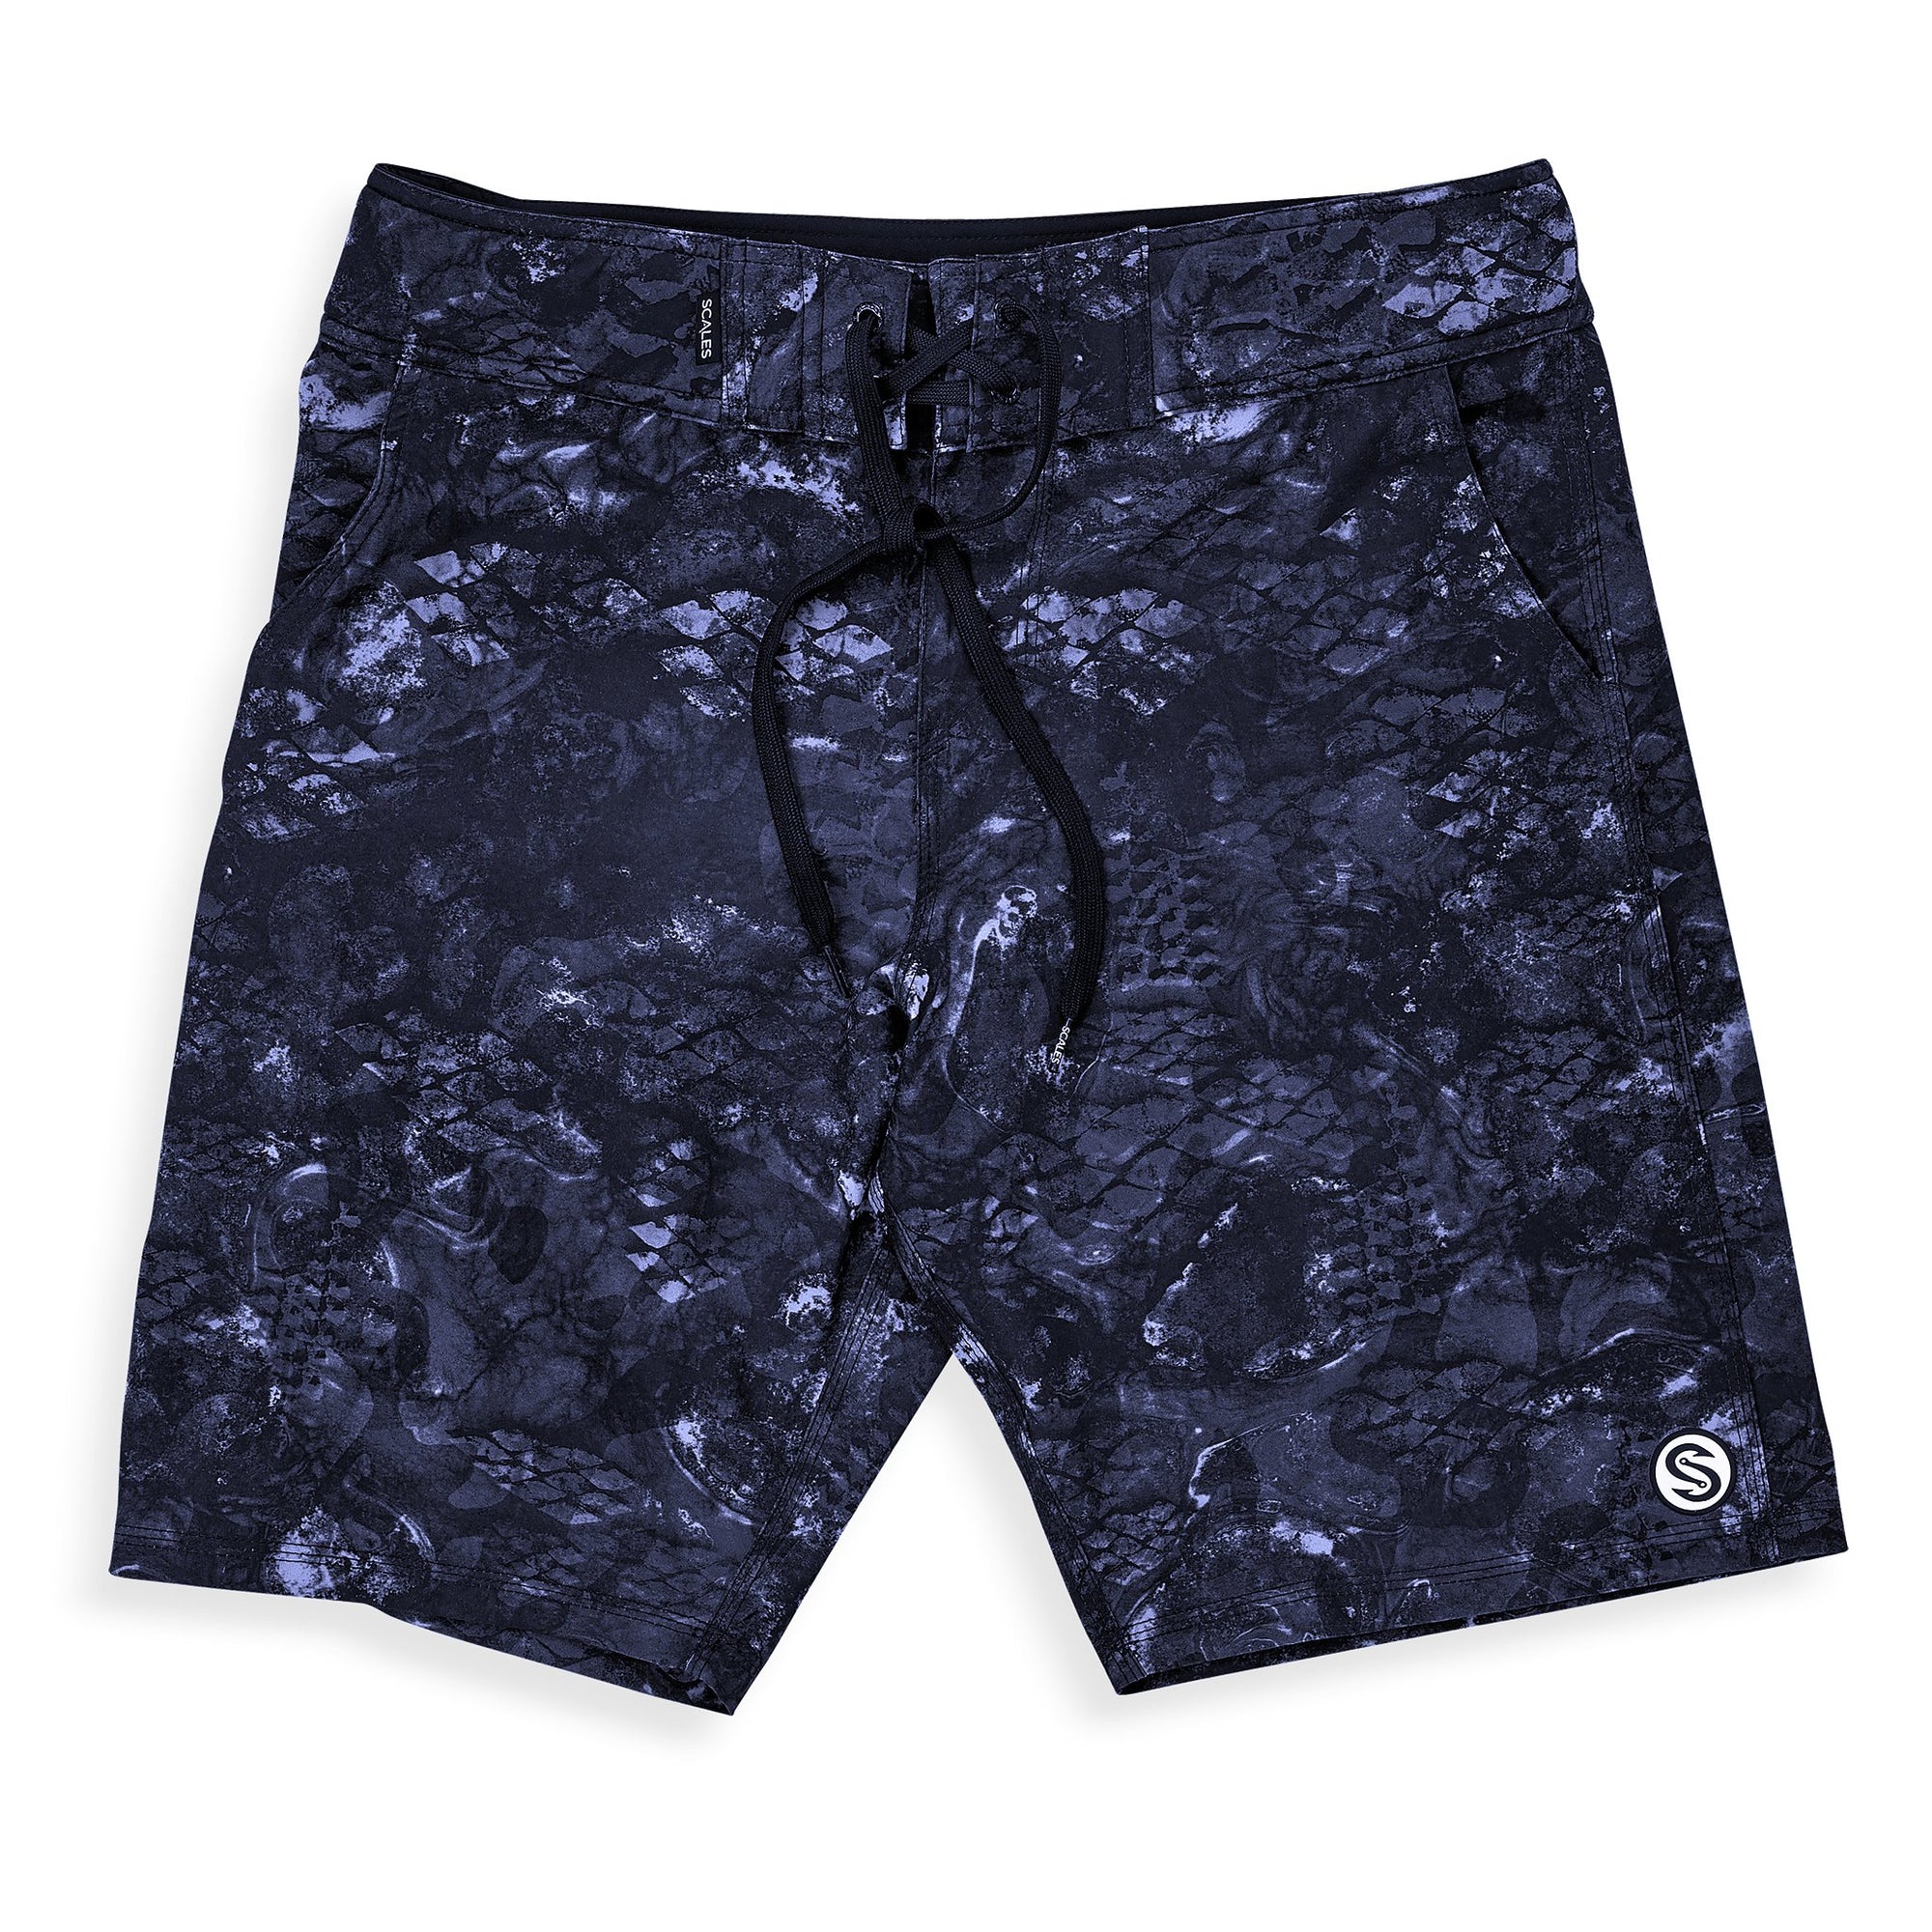 Scales Gear First Mates Boardshort's Black Camo Front